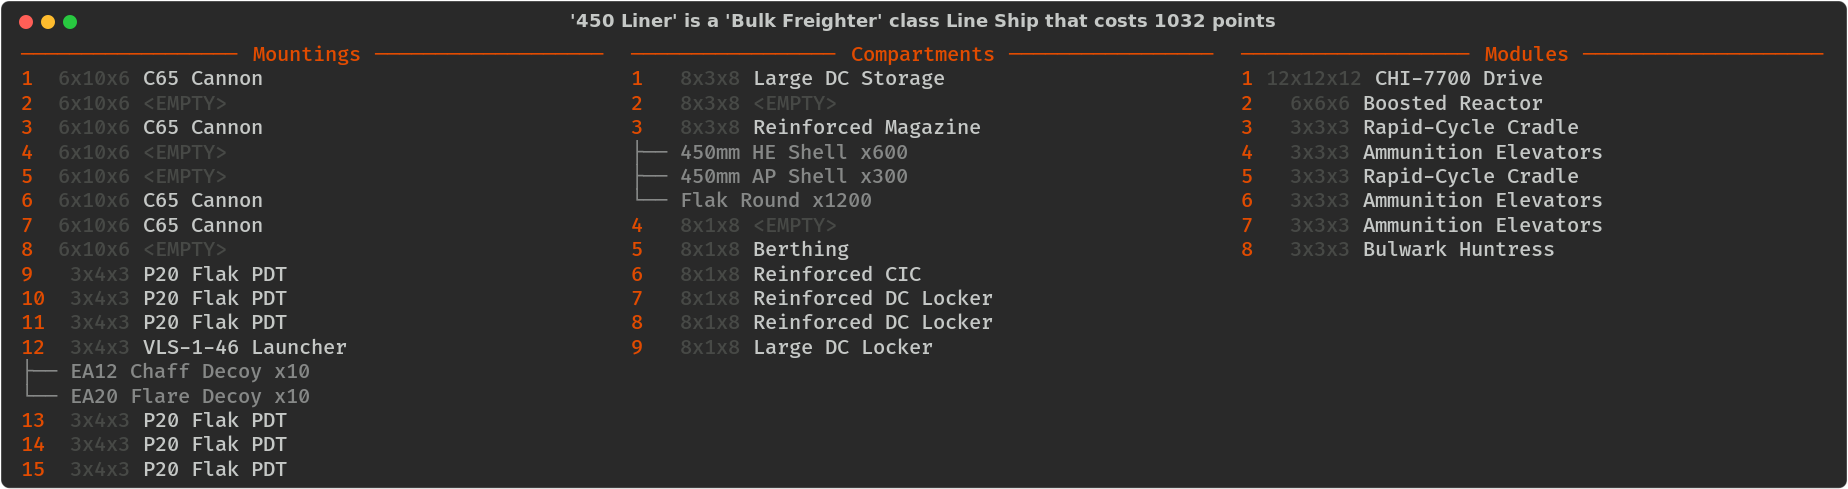 Good Nut's Guide to Bulk Freighters image 7